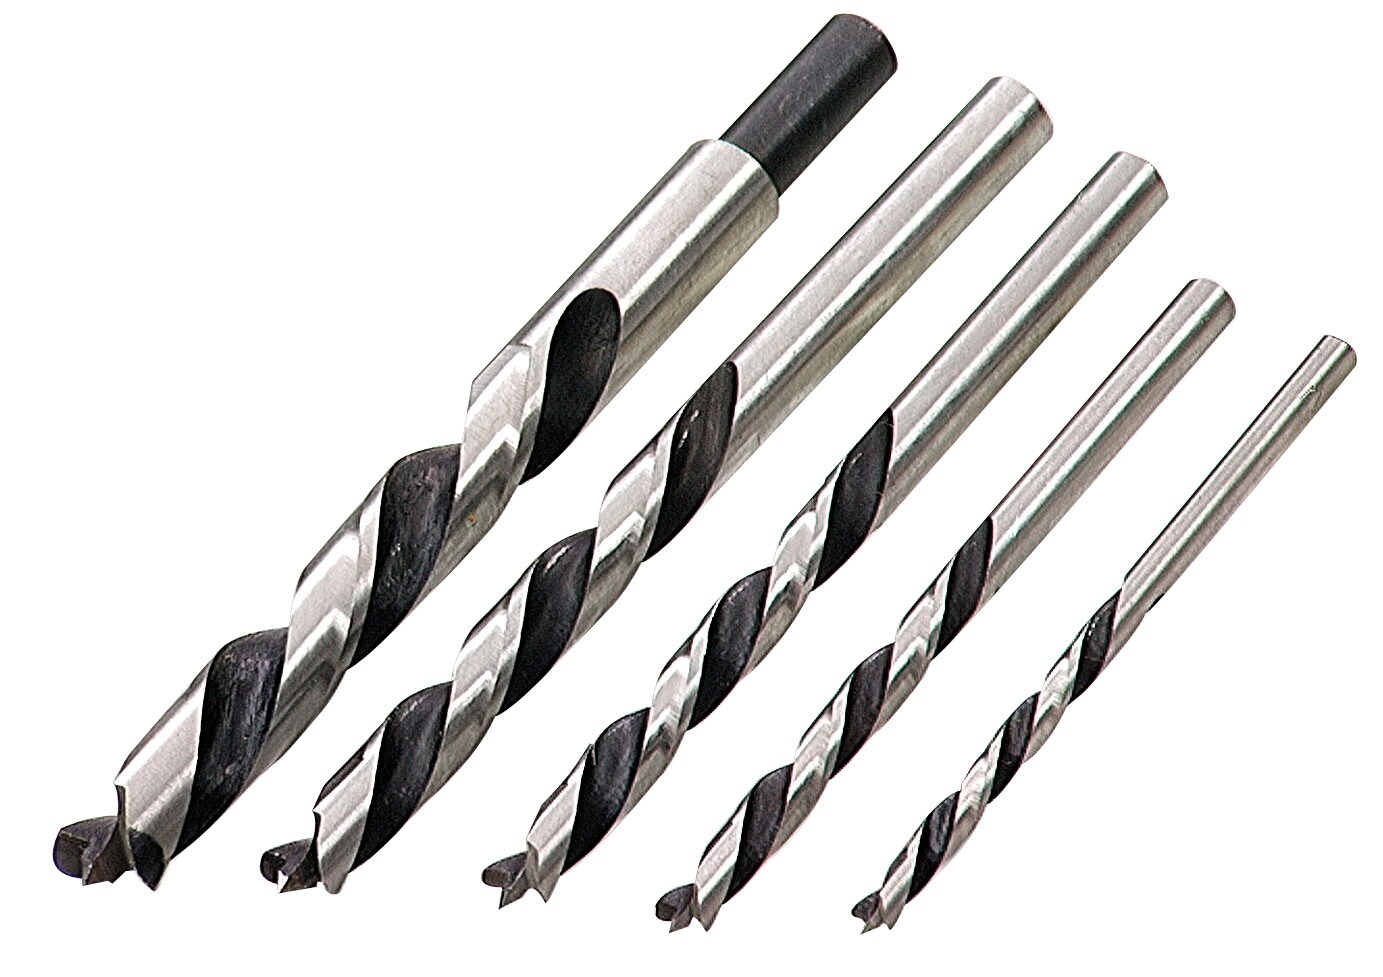 IDEAL 2-Piece 9/16-in x 54-in Woodboring Auger Drill Bit Set in